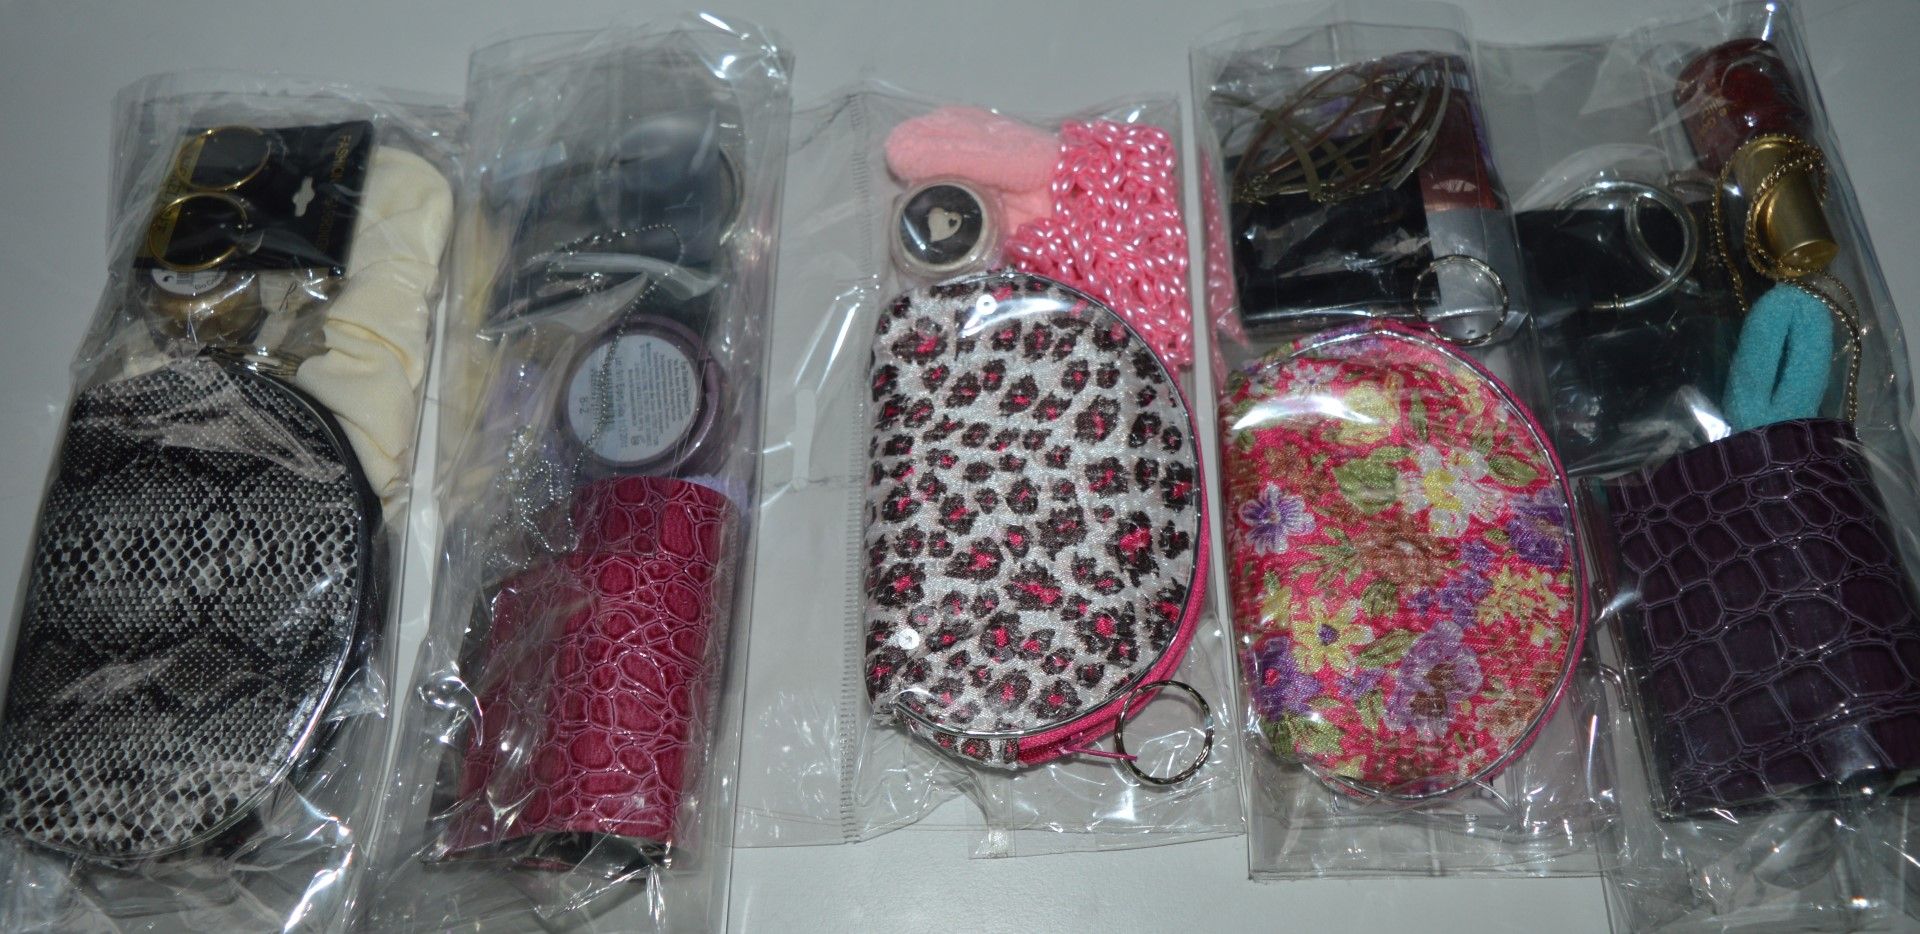 50 x Girls Beauty Gift Sets - Each Set Includes Items Such as a Stylish Purse, Ear Rings, Hair - Image 2 of 13